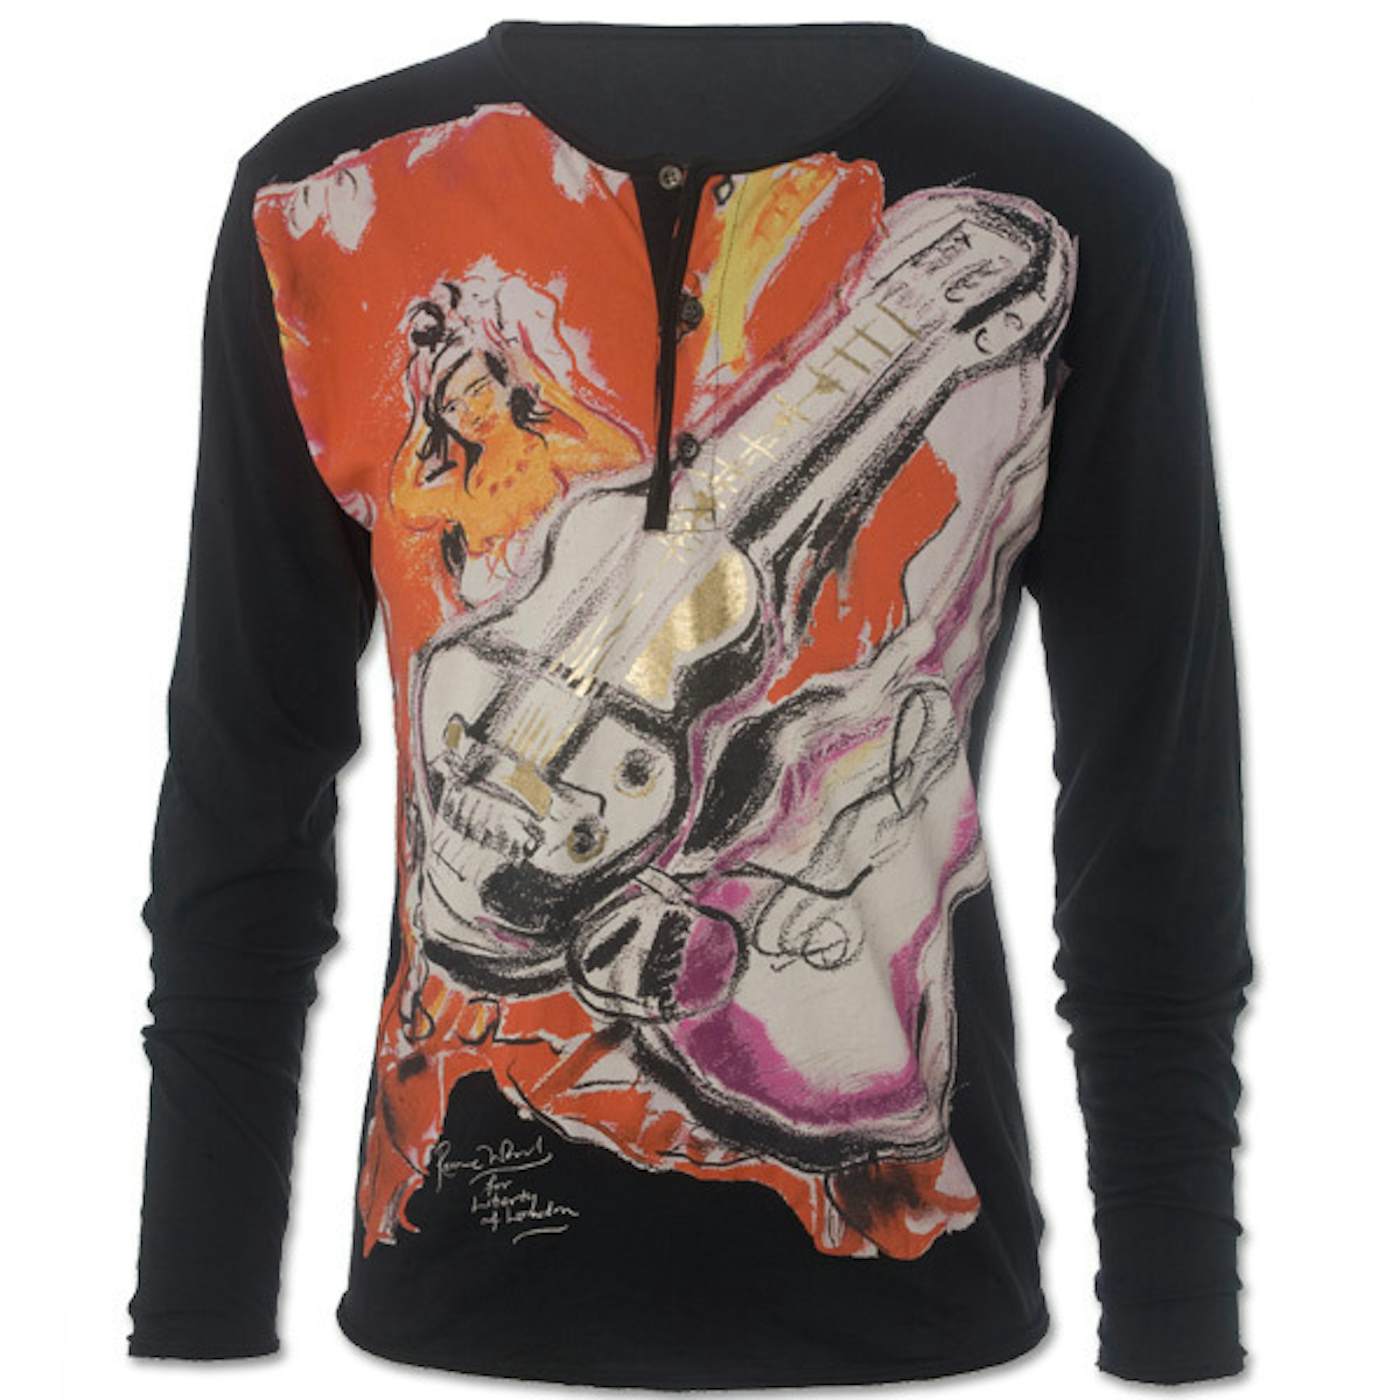 Black Guitar Button Jersey, Ronnie Wood for Liberty of London